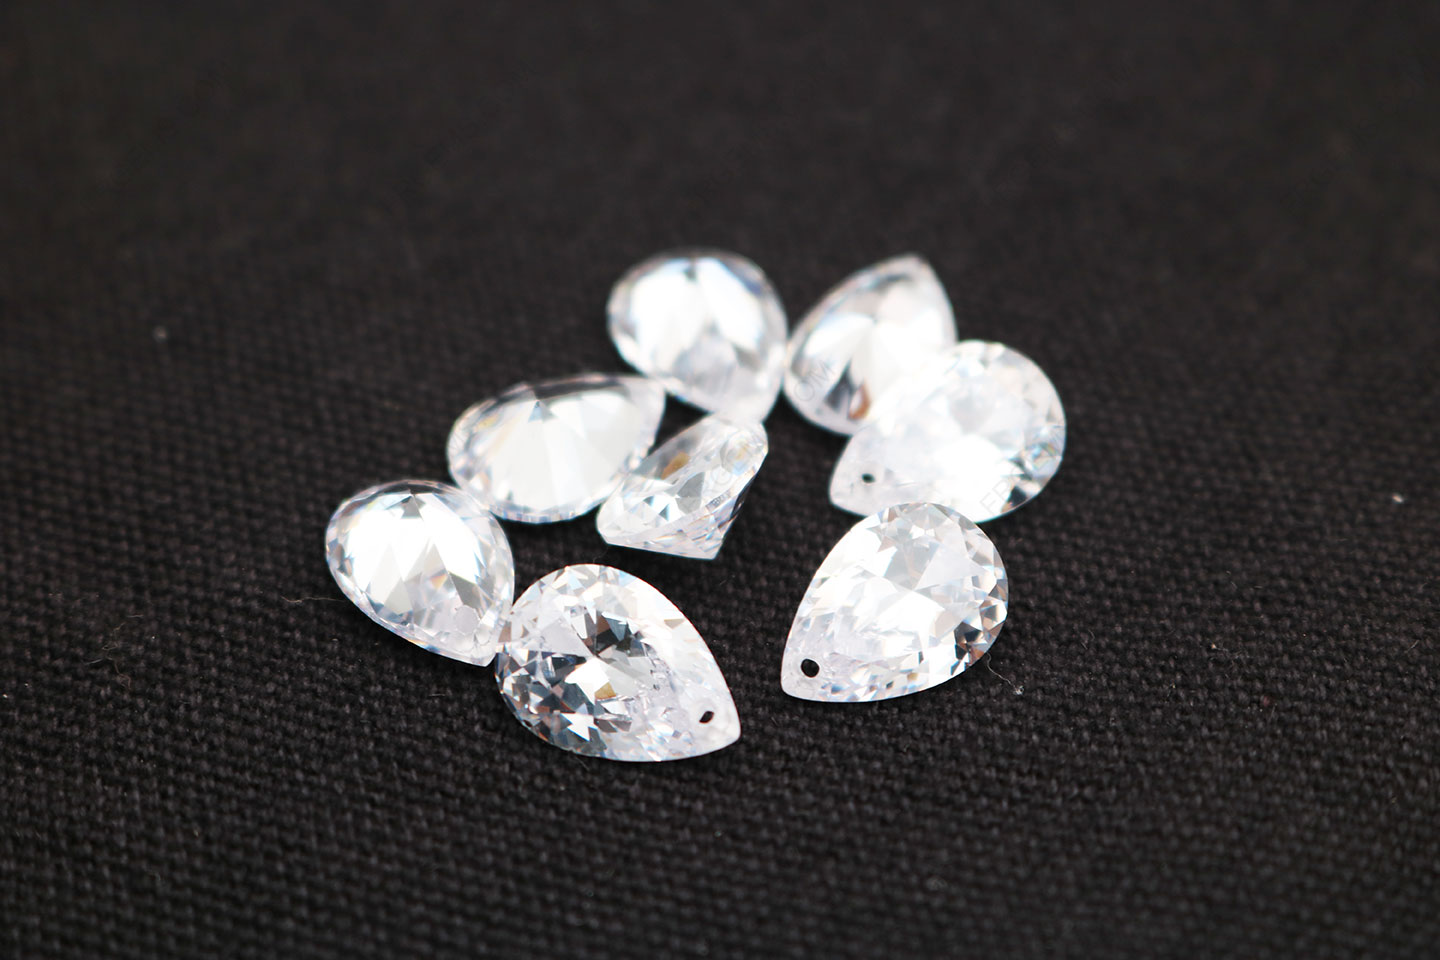 Cubic_Zirconia_White_Color_Pear_Shape_Faceted_diamond_Cut_drilled_holes_10x7mm_stones_IMG_0995